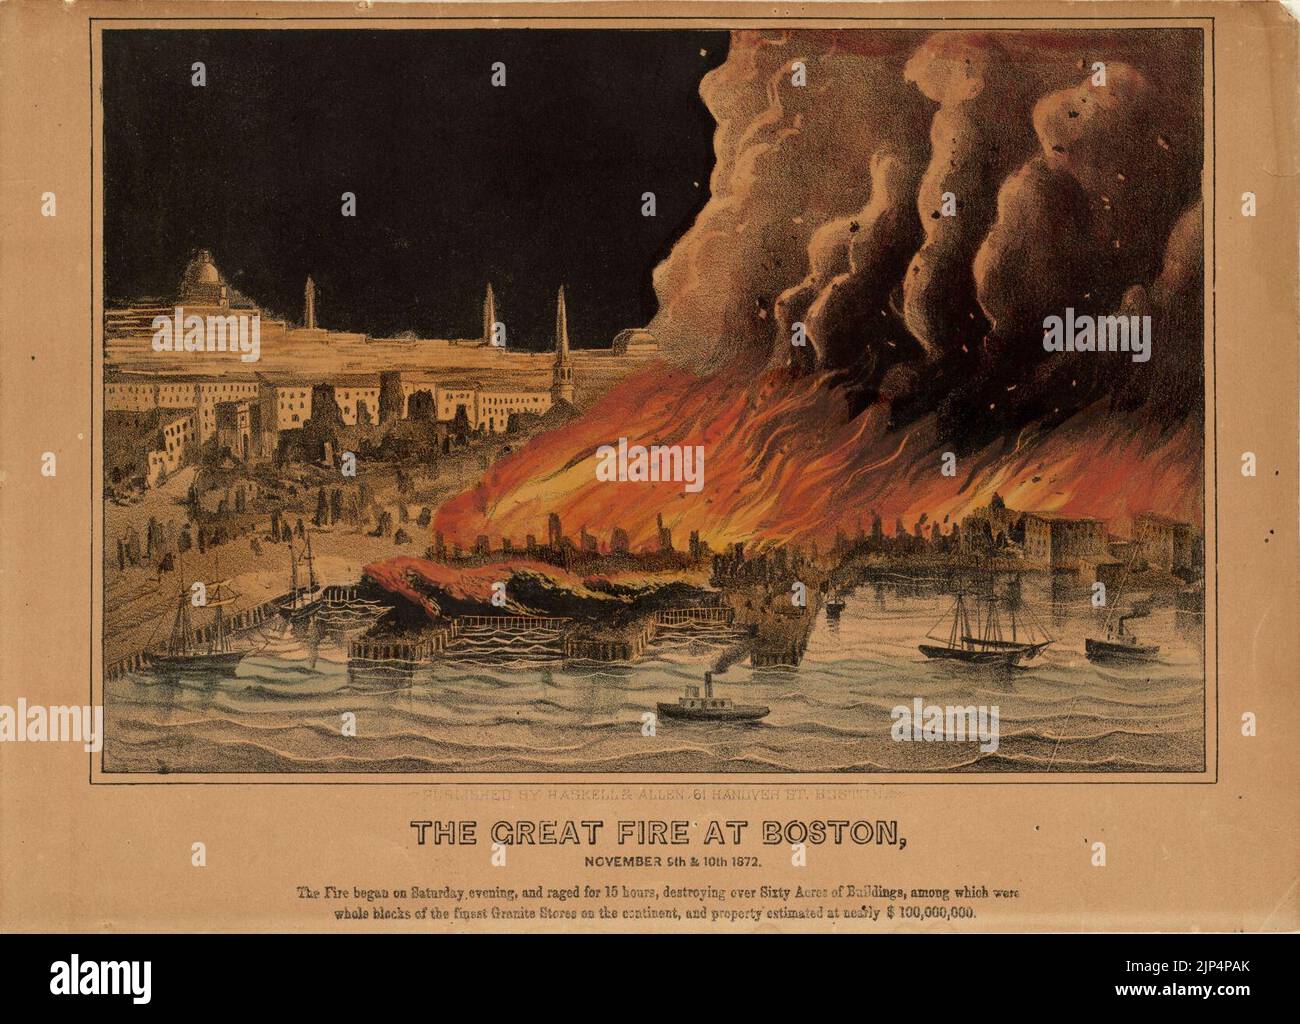 The Great Fire at Boston, November 9th and 10th, 1872, this image created c. 1872, Stock Photo